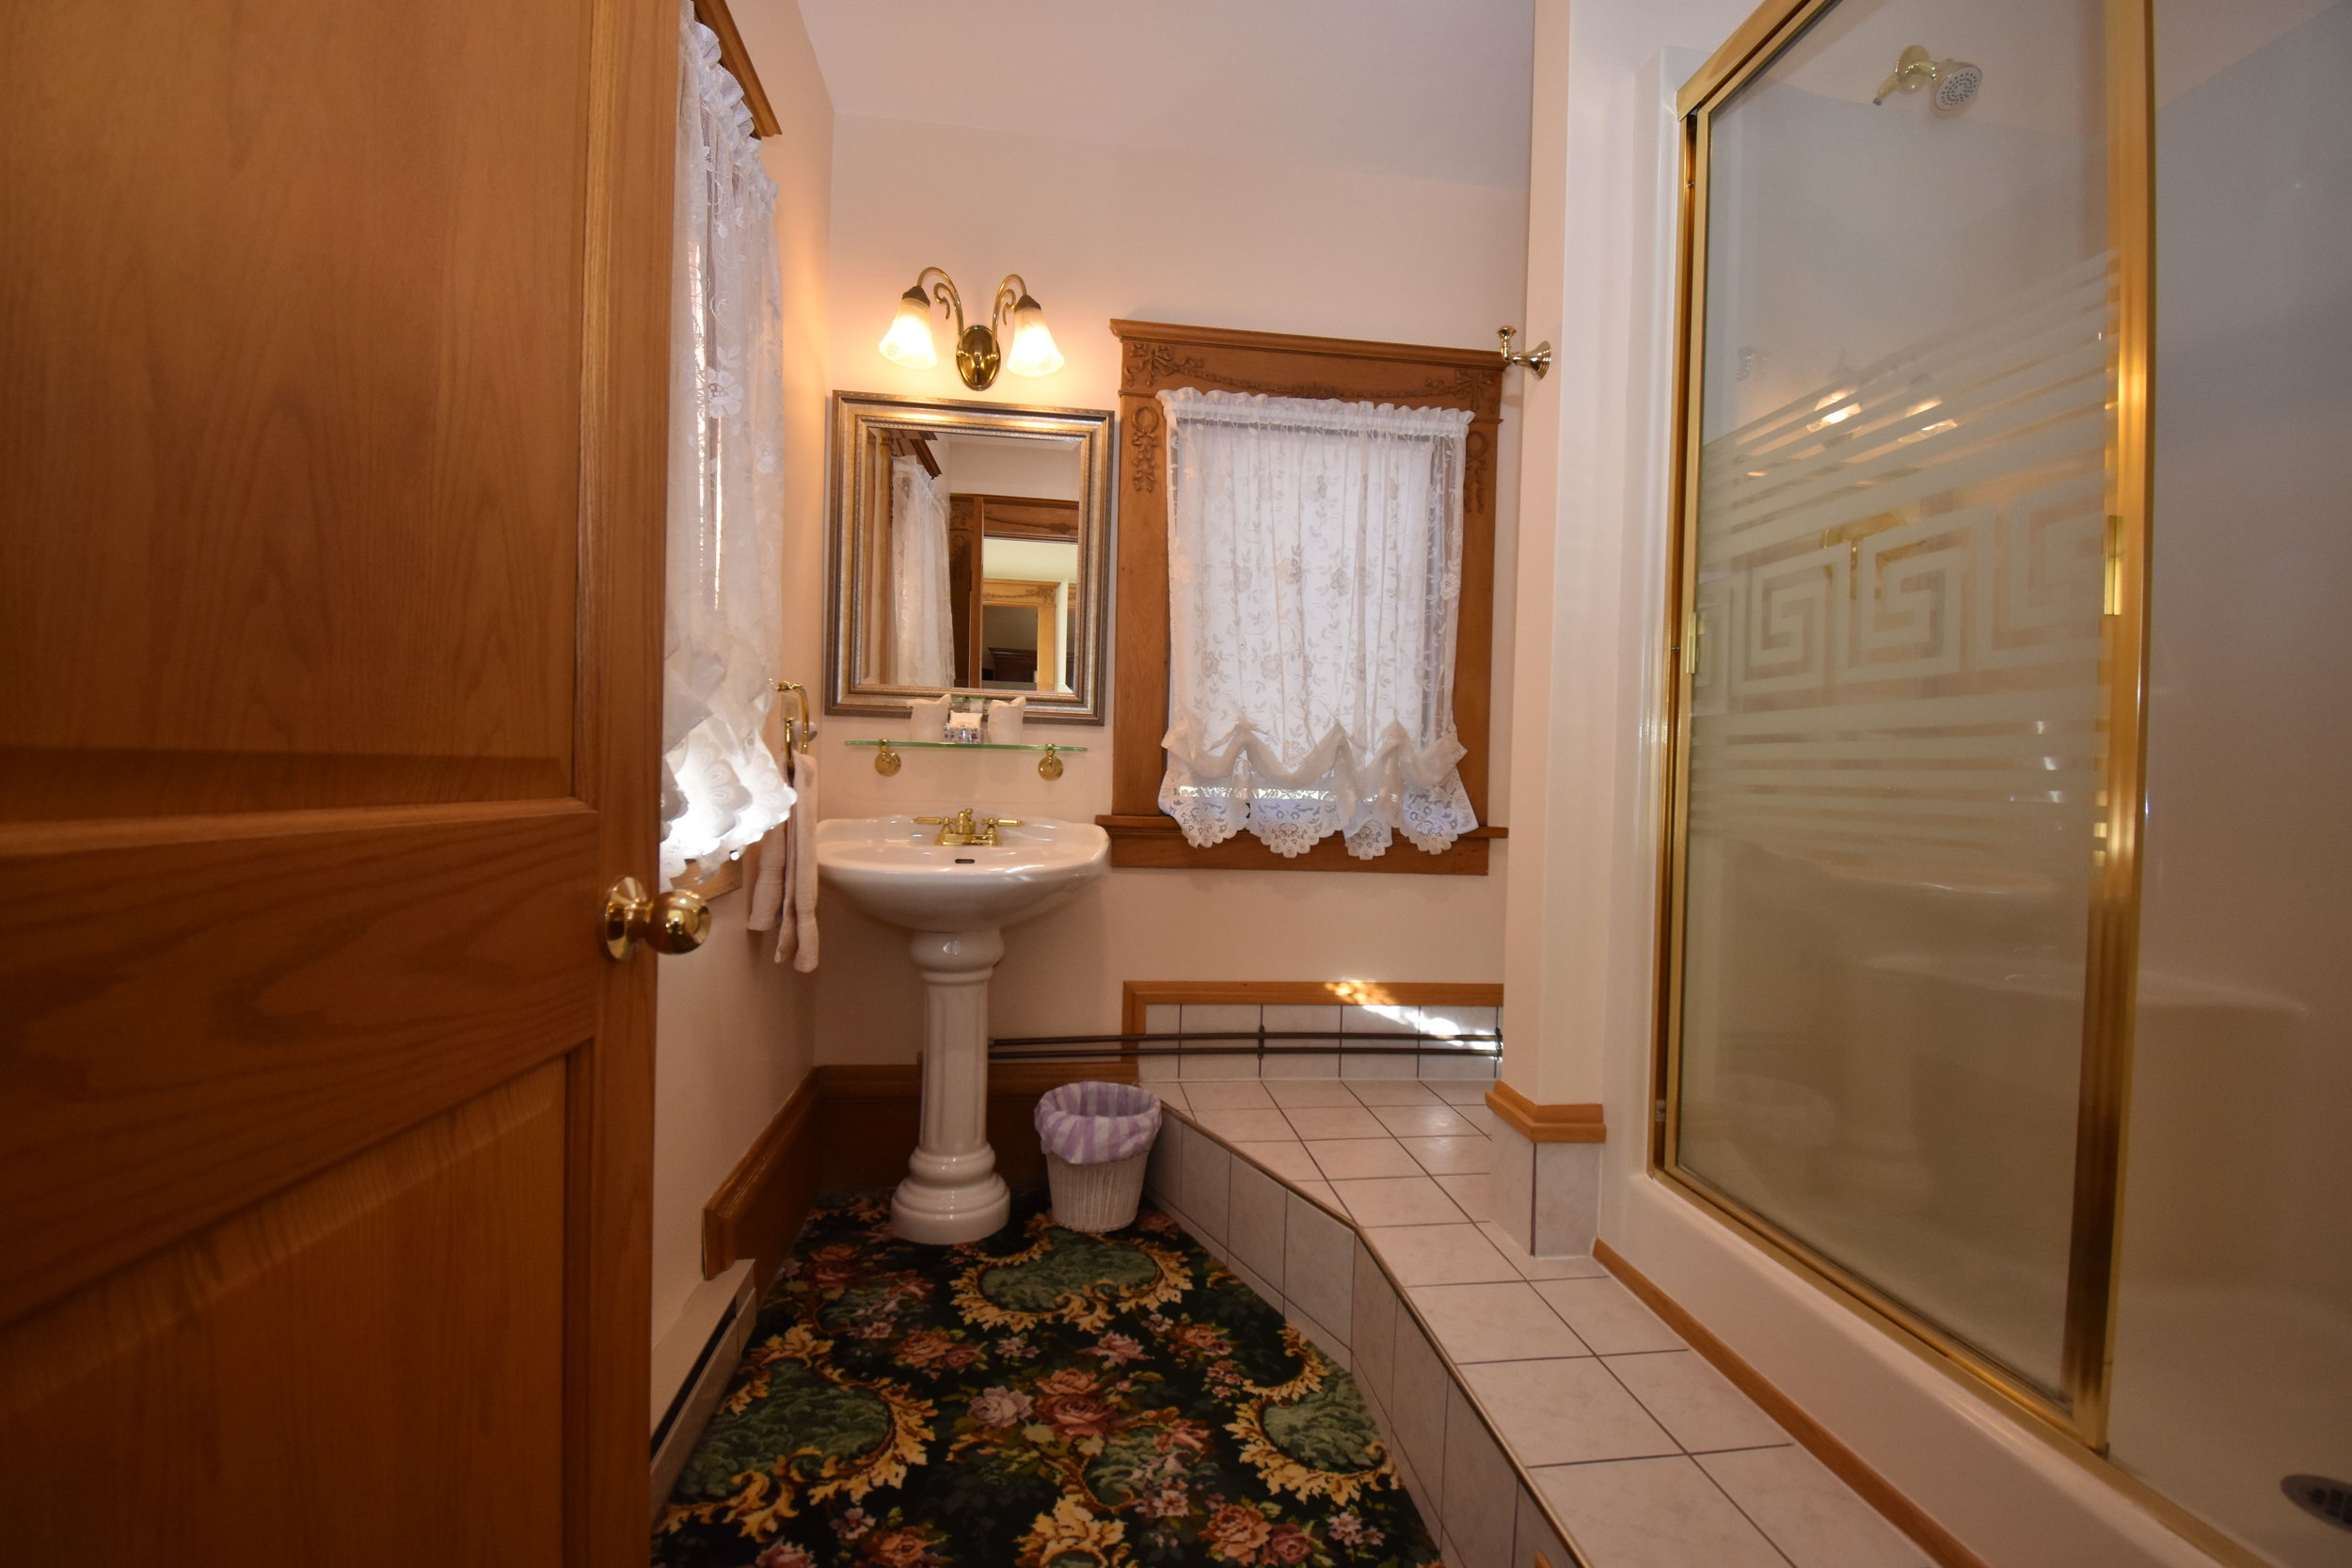 Bathroom with 2 person shower